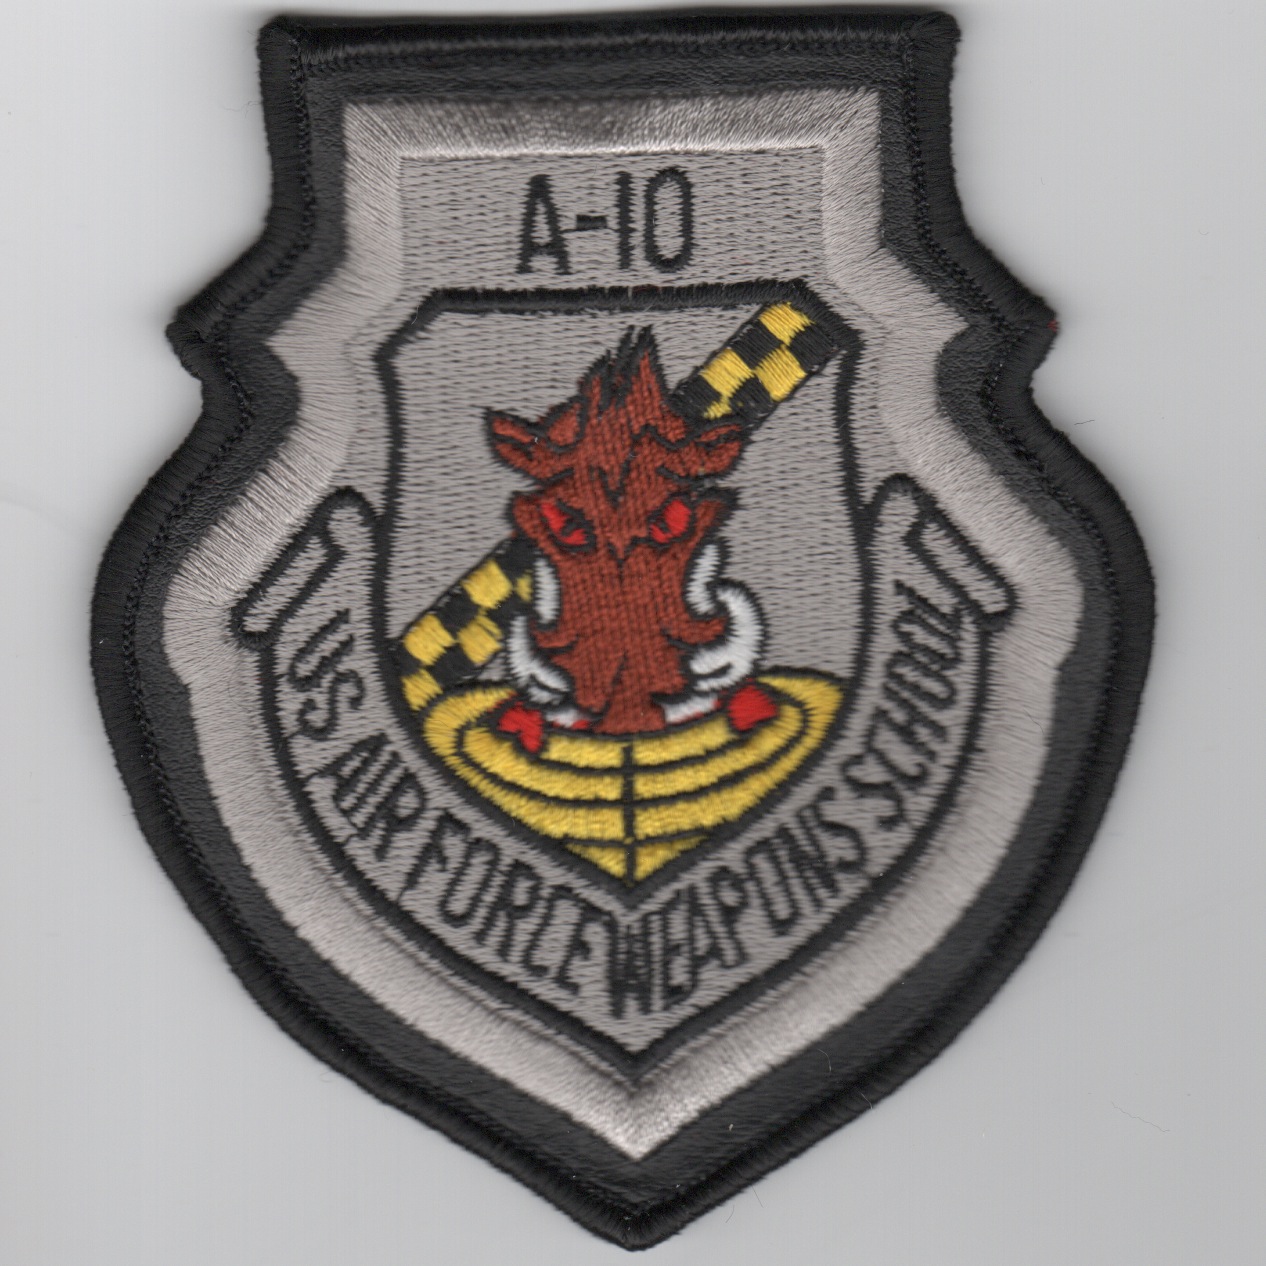 USAF WIC A-10 Division Patch (LX)